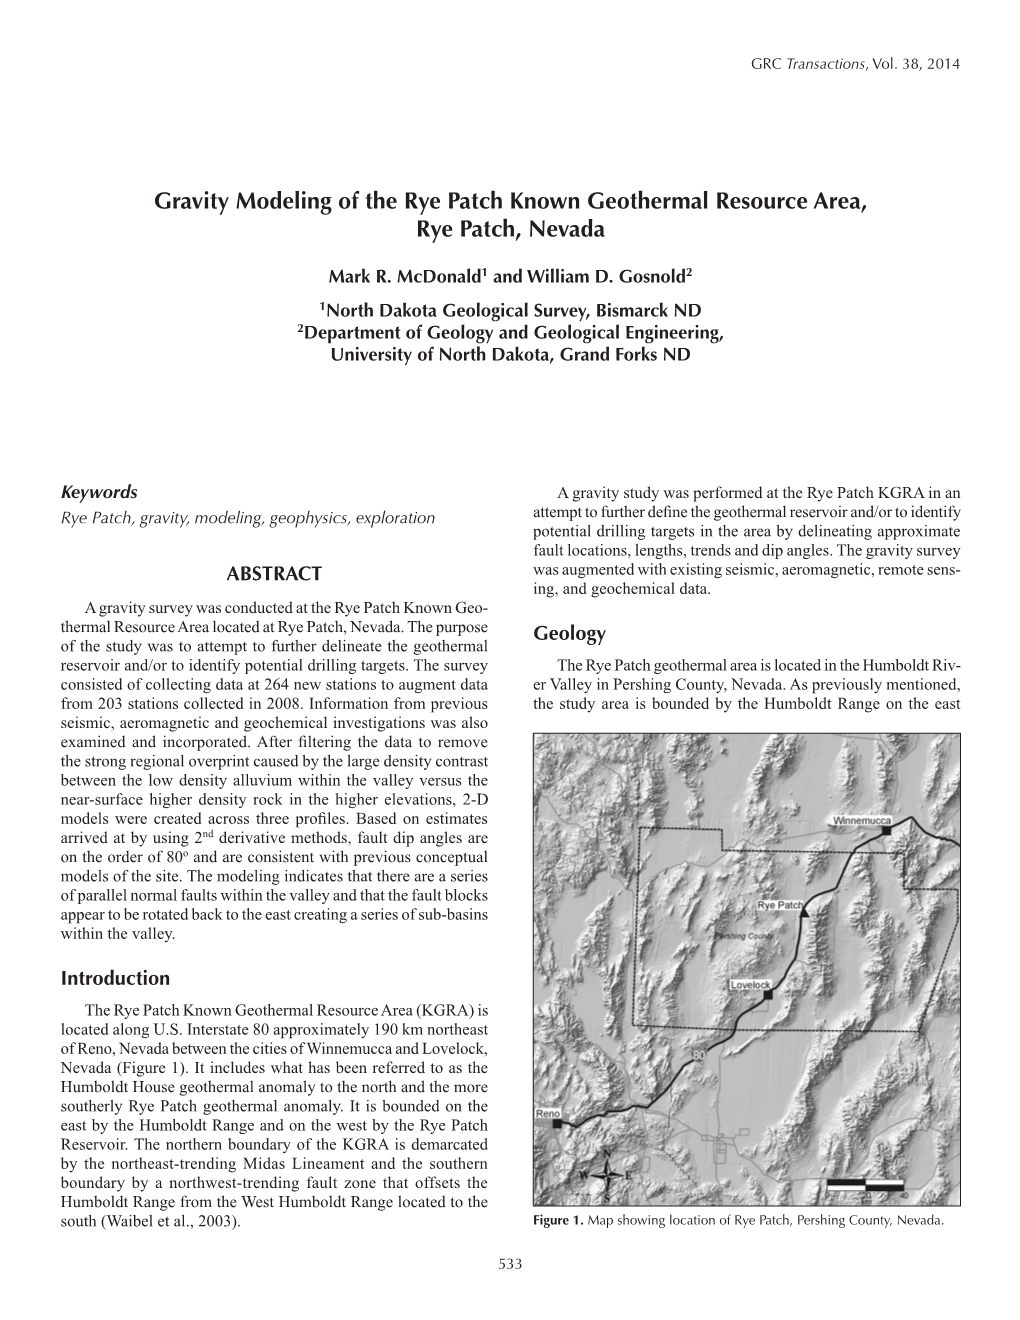 Gravity Modeling of the Rye Patch Known Geothermal Resource Area, Rye Patch, Nevada